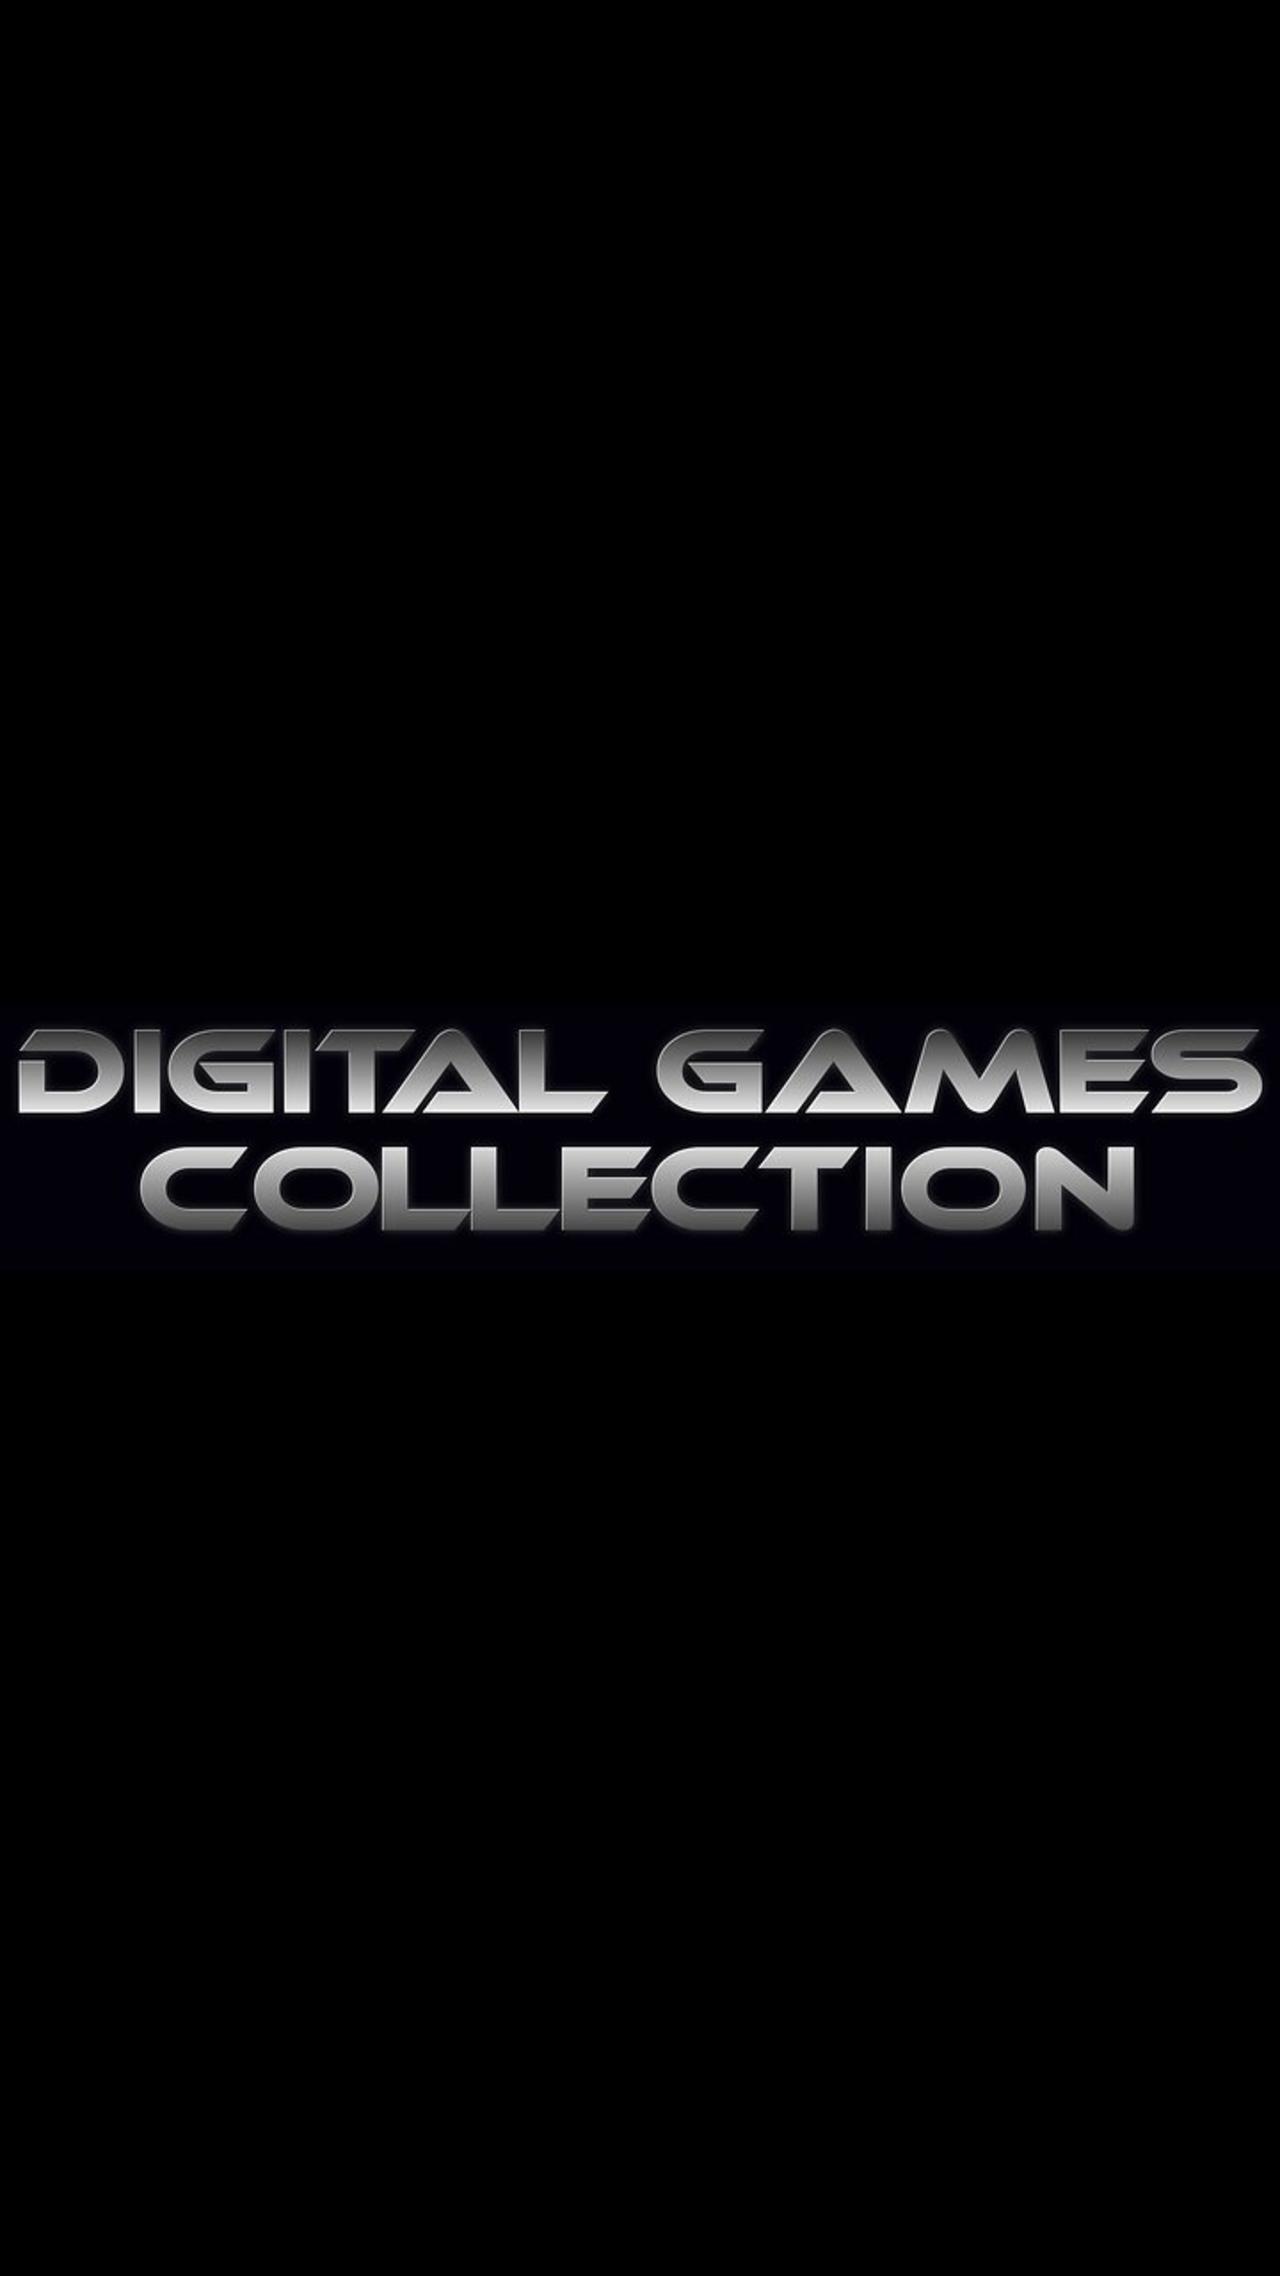 Digital Games Collection